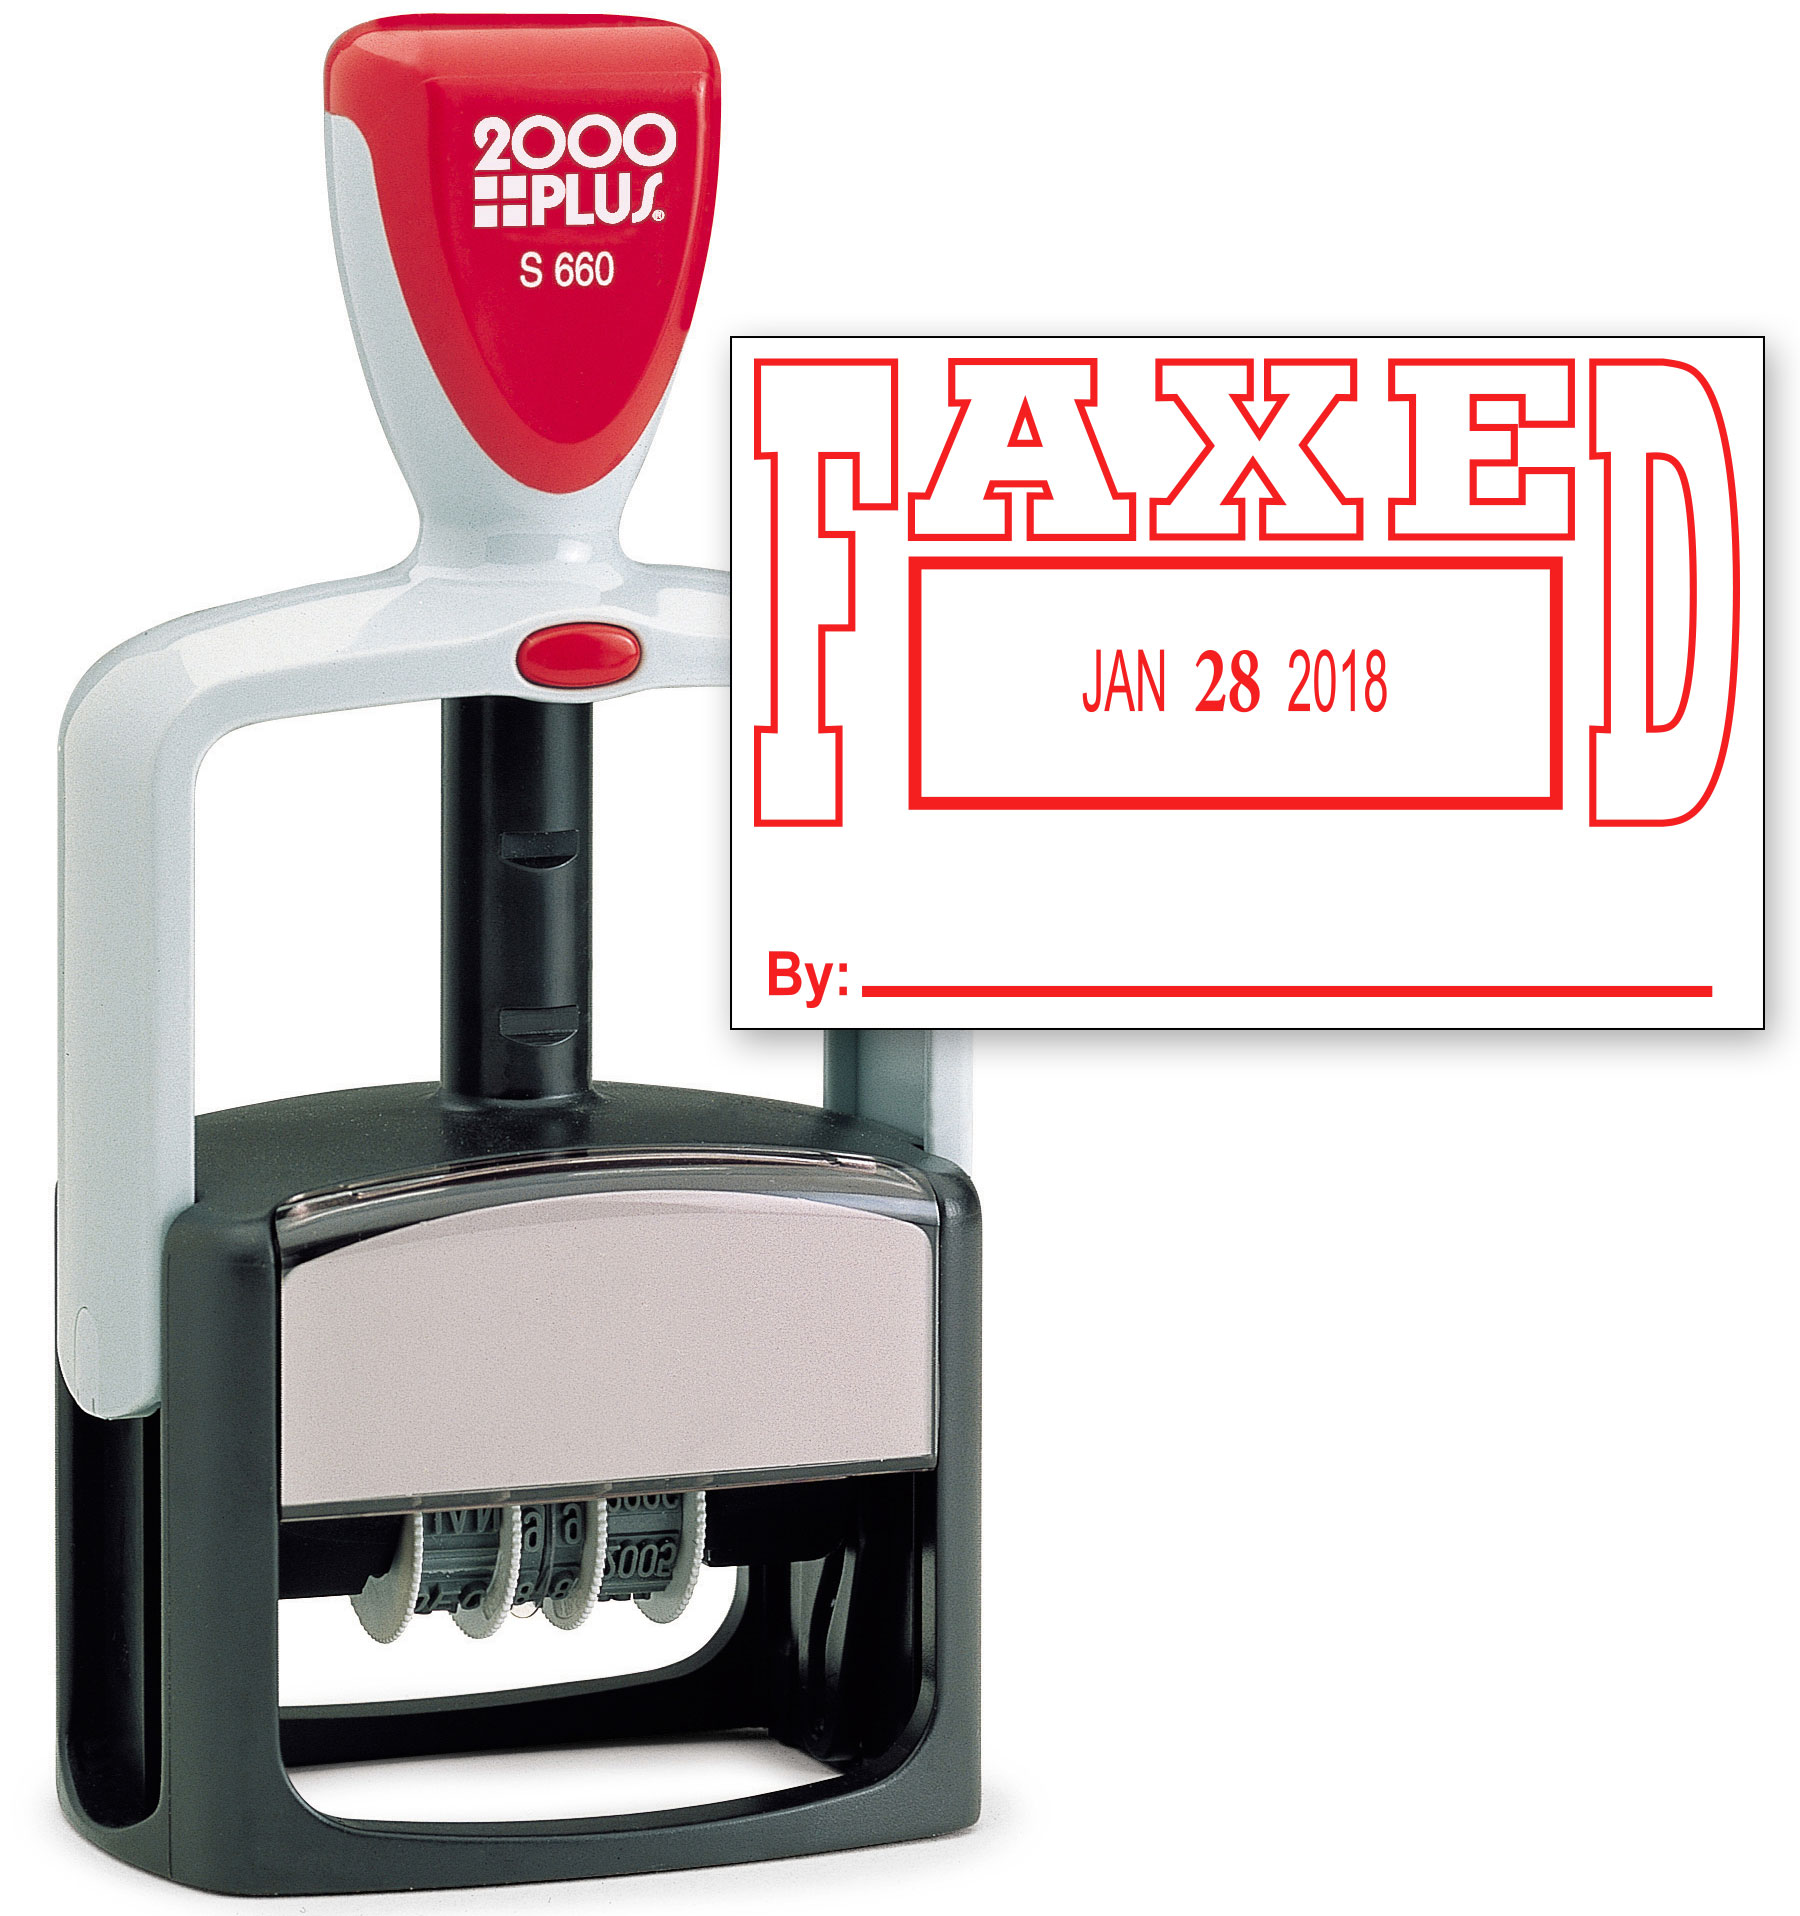 2000 PLUS Heavy Duty Style 2-Color Date Stamp with FAXED self inking stamp - Red Ink